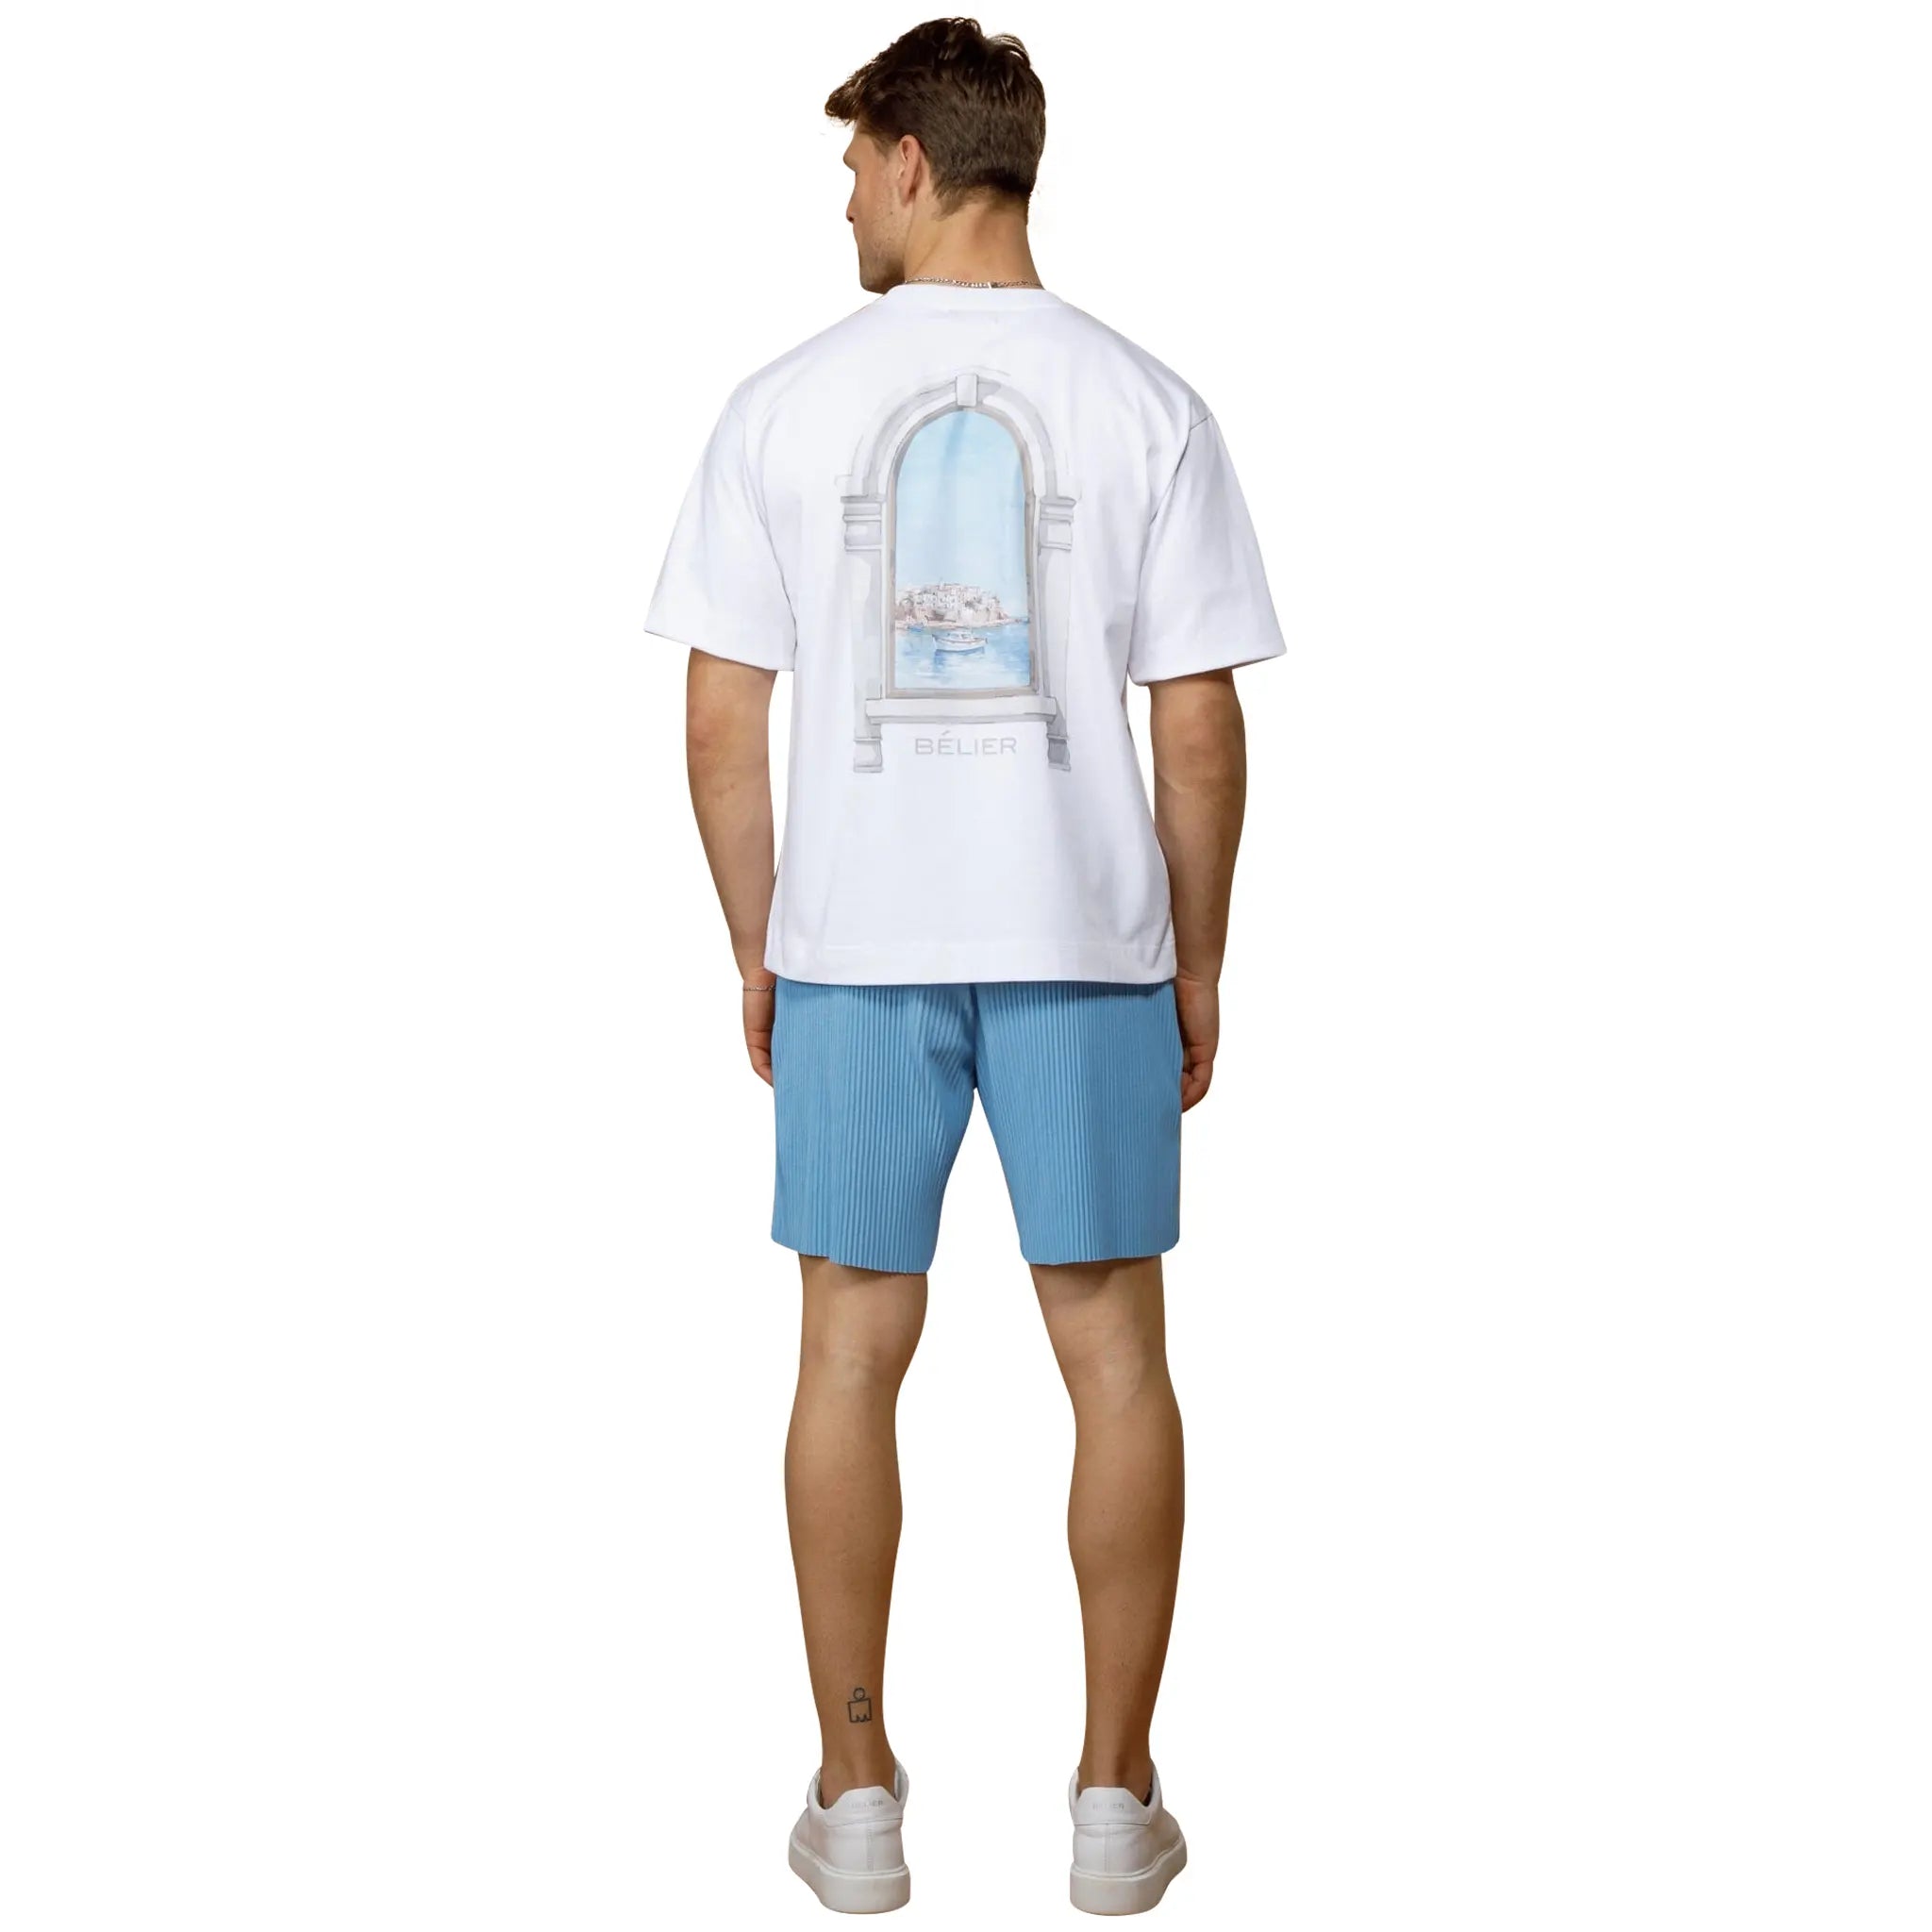 Model Back view of Belier Arch View White T Shirt BM-214